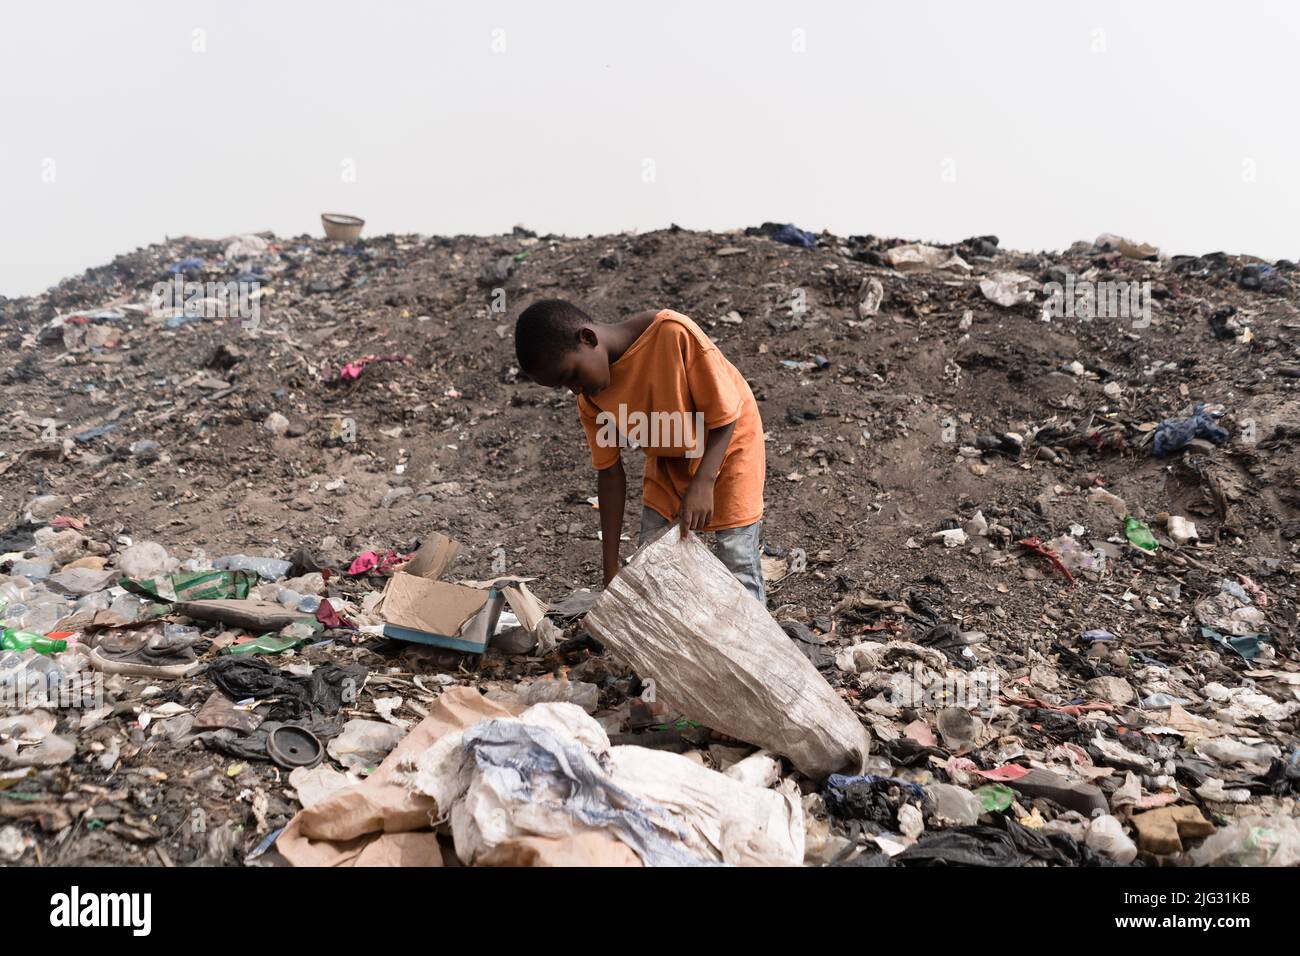 Street boy filling a plastic bag with reusable items found at a landfill site in a West African capital to make a living; symbol of stolen childhood Stock Photo